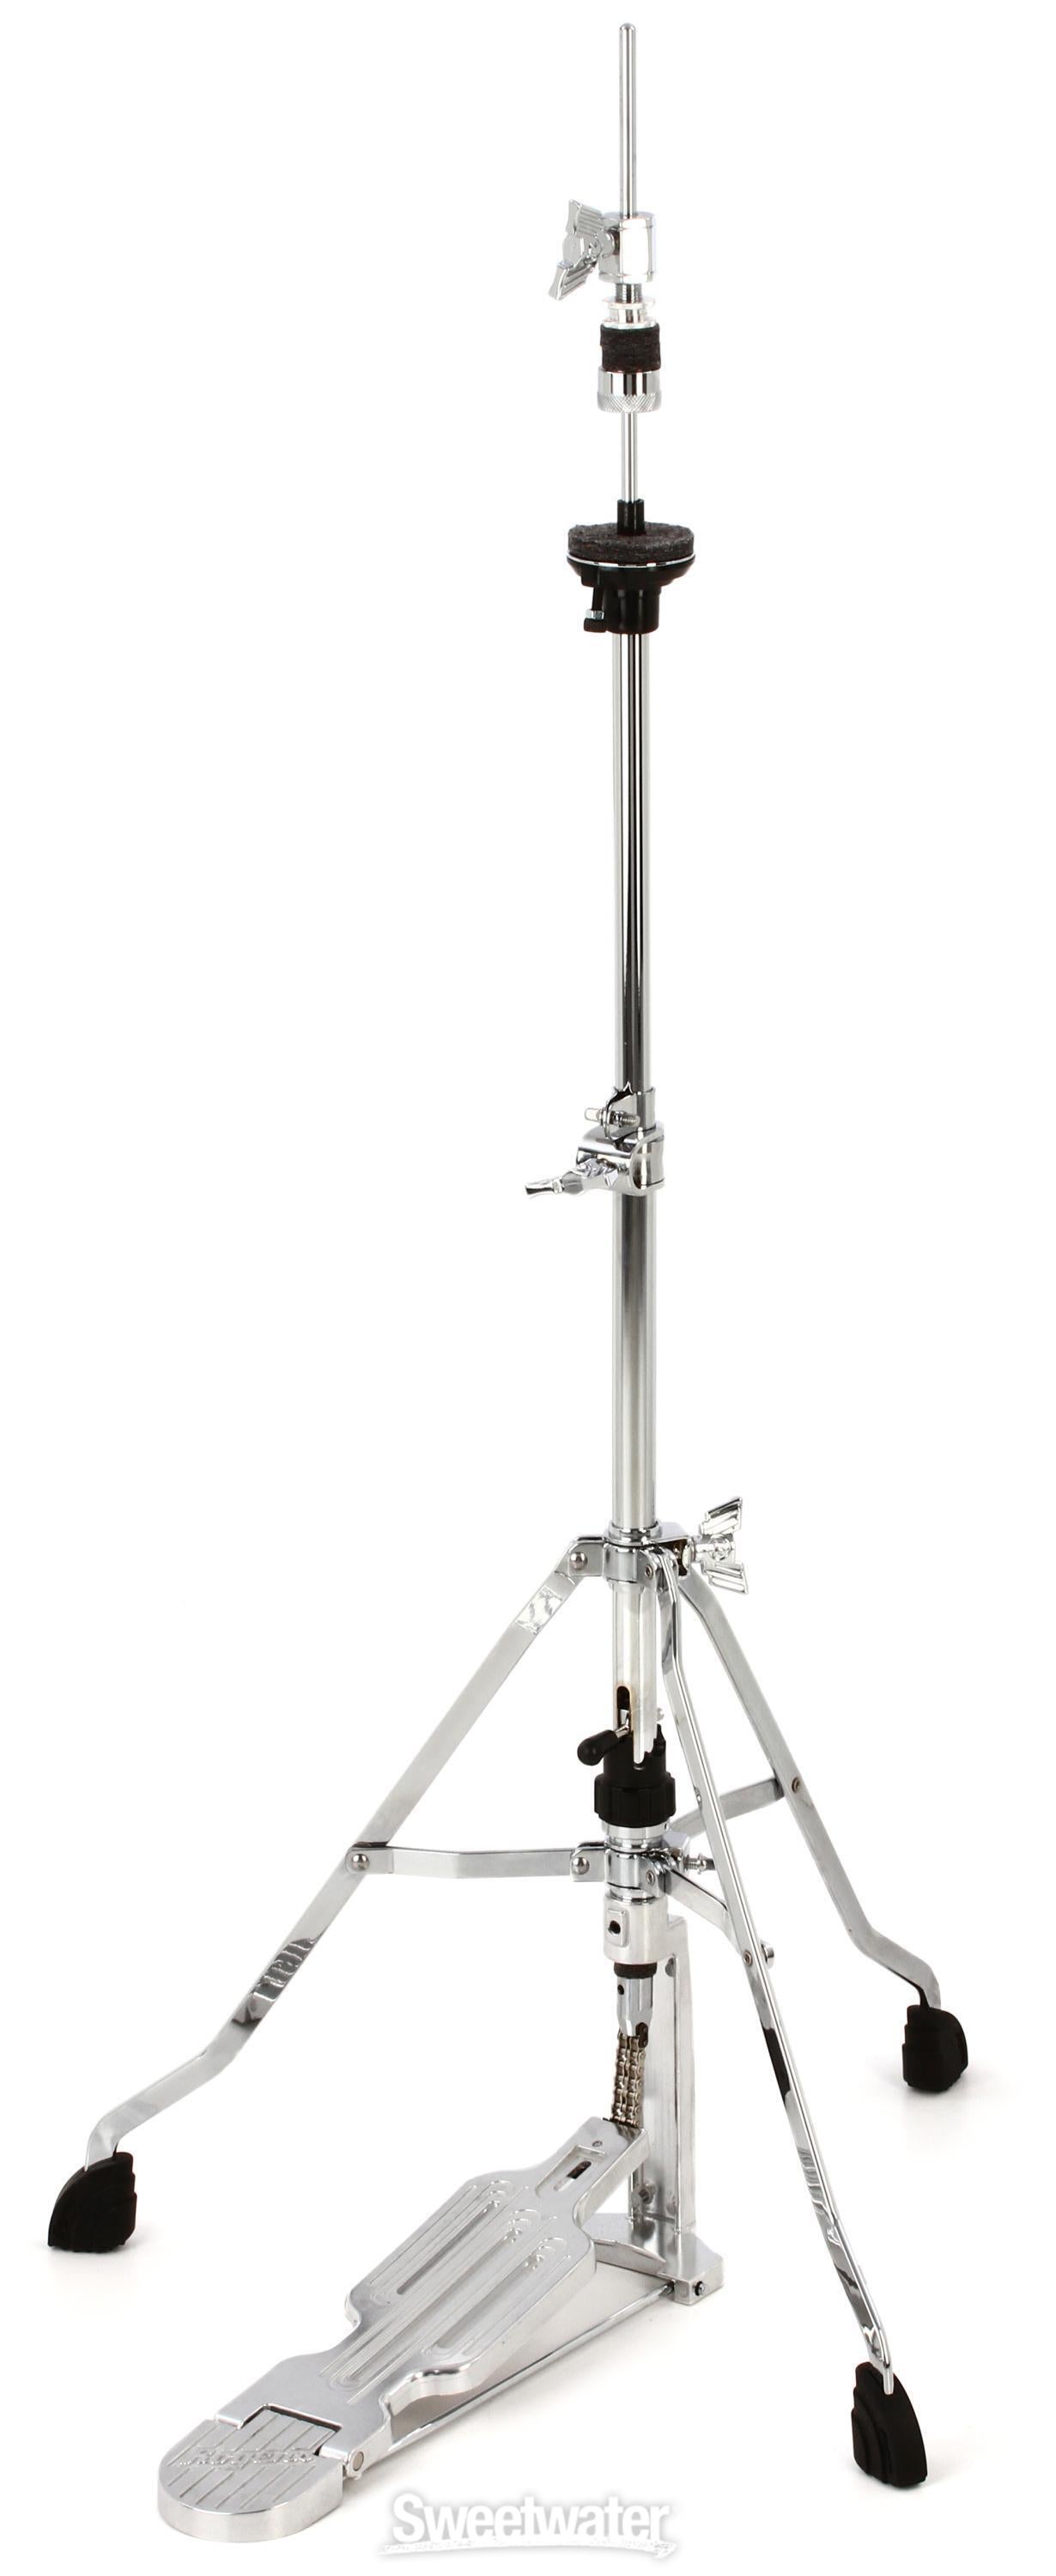 Rogers Drums RDH7 Dyno-Matic Hi-hat Stand - Single Braced